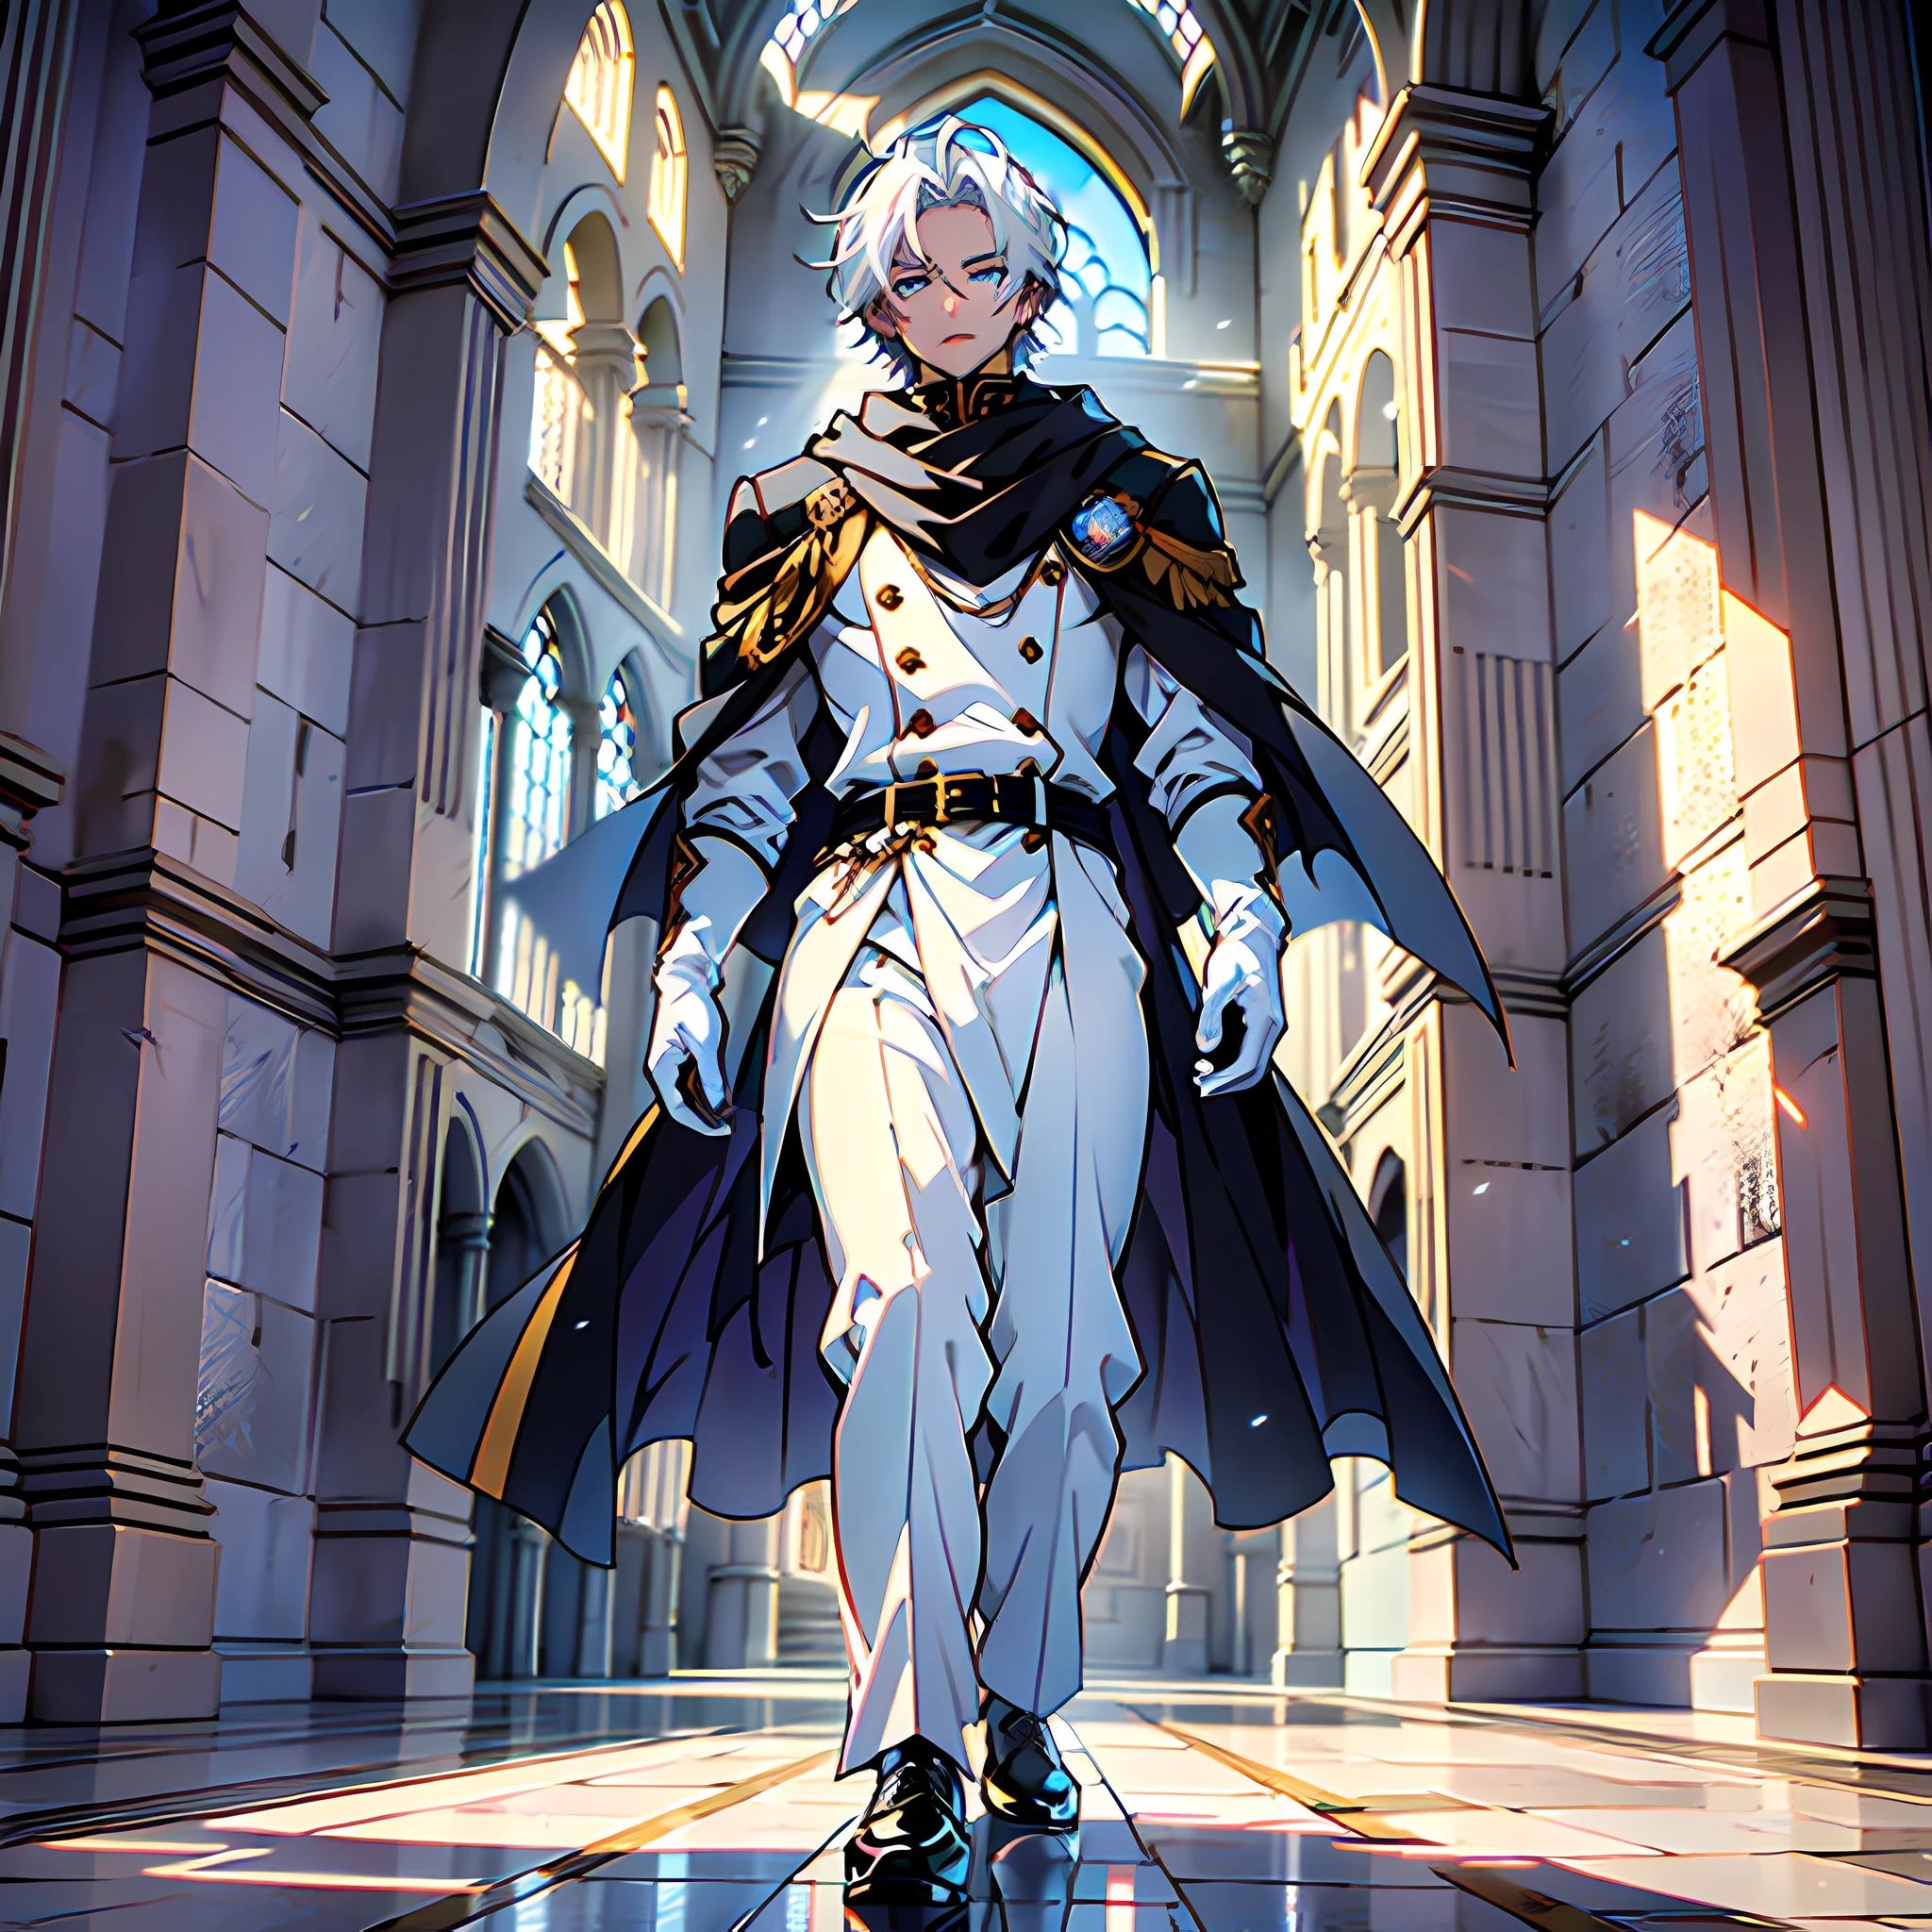 ((Anime art, man with a good physique, mature man)) ((Best quality, masterpiece, best resolution, breathtaking scenery, 4k quality, clear full HD image, high clarity)), ((a character, standing, alone in the scene, facing the viewer)), (knight's outfit, white noble blouse, white noble pants, black dress shoes, cloak with white scarf with black details, white gloves), (light blue eyes, light blue details in the hair, short white hair, expressionless look, pale skin, well-shaped lips), ((interior of a castle, walking through the scene, dawn light through the castle windows))